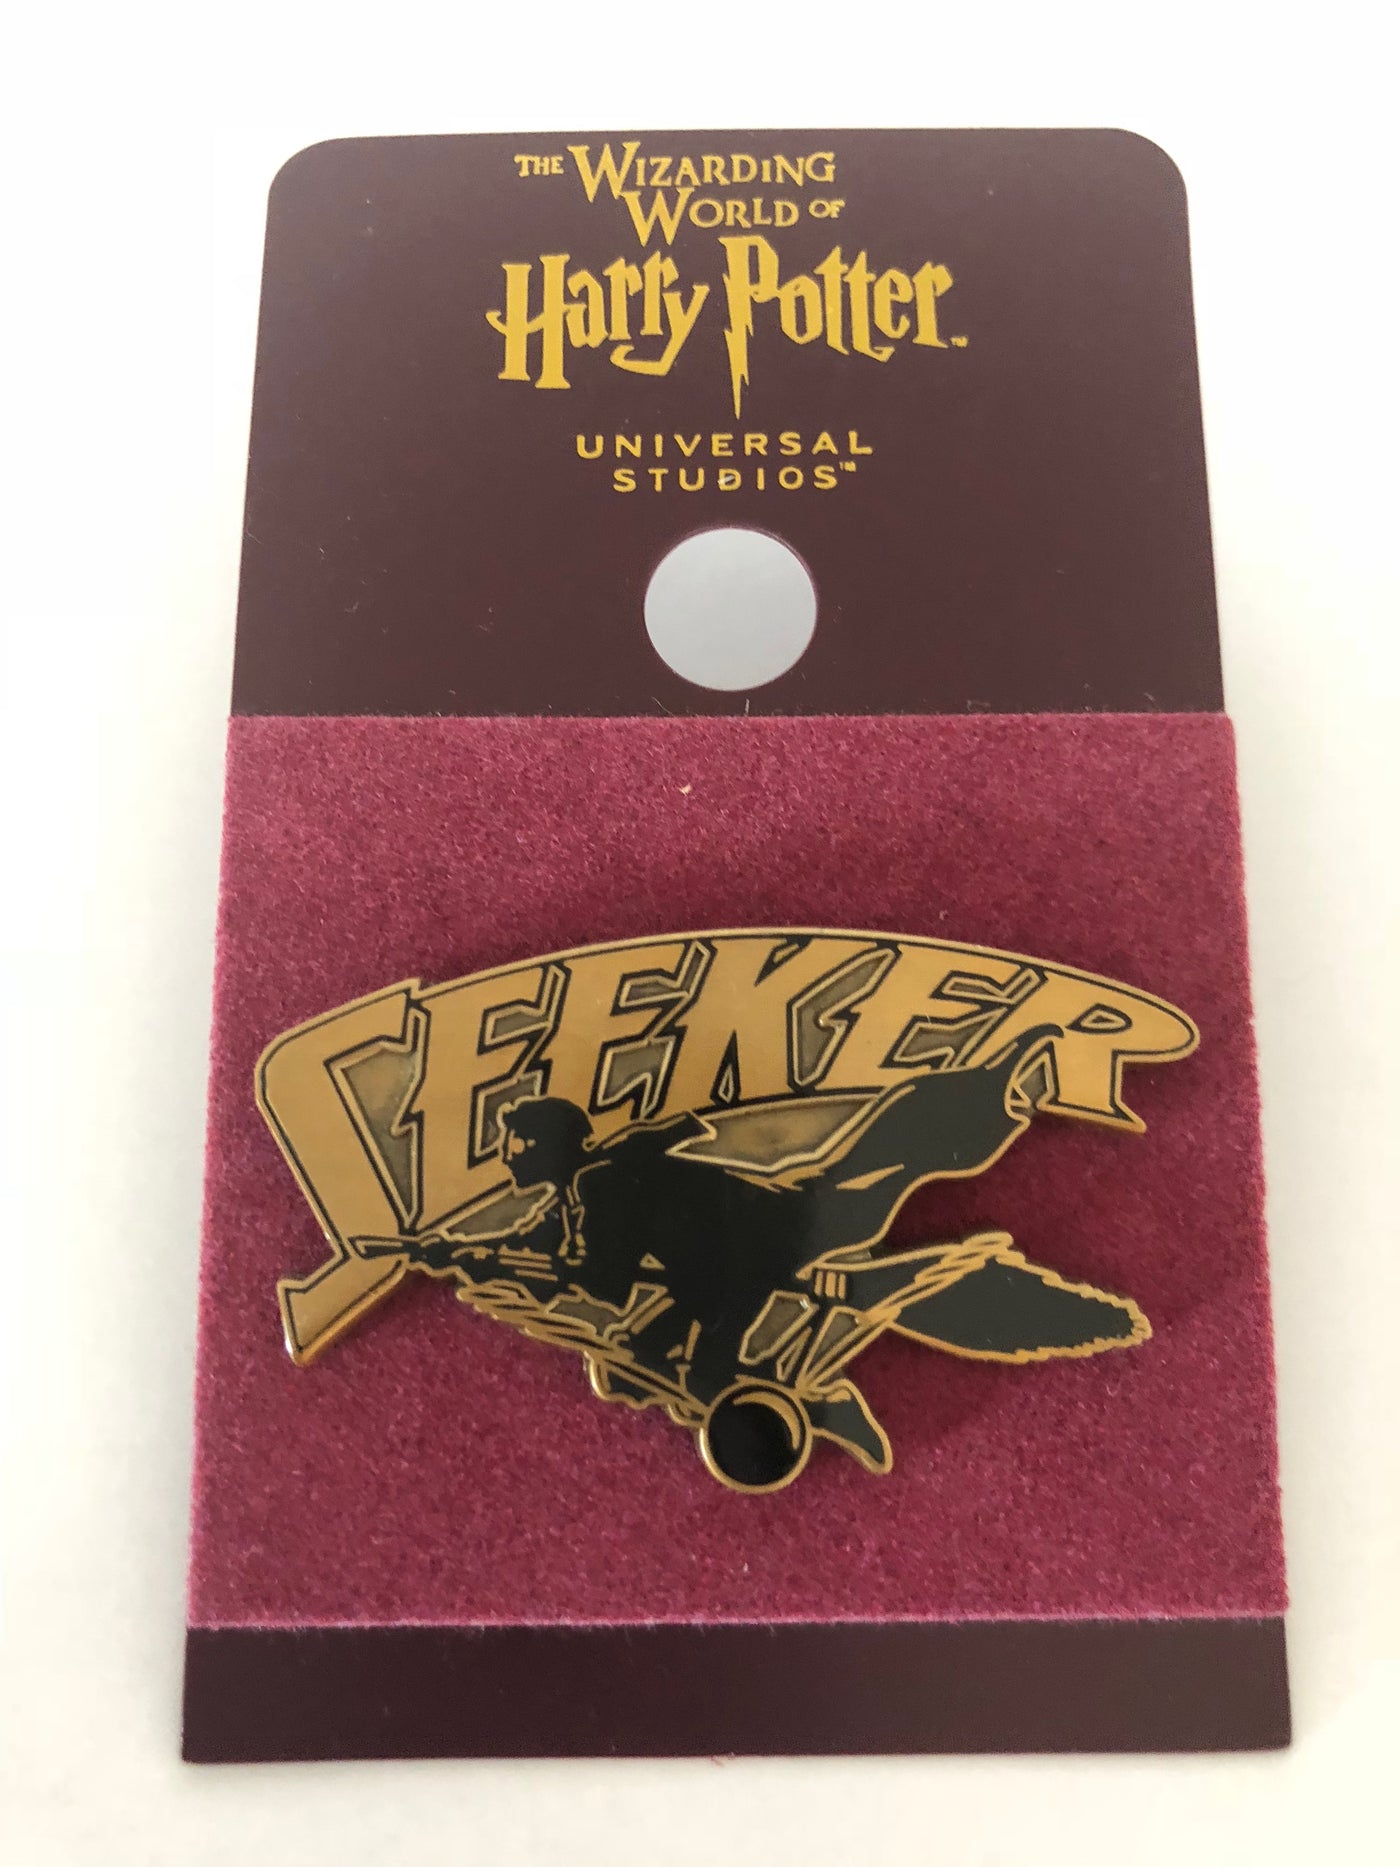 Universal Studios Harry Potter Seeker Pin New with Card